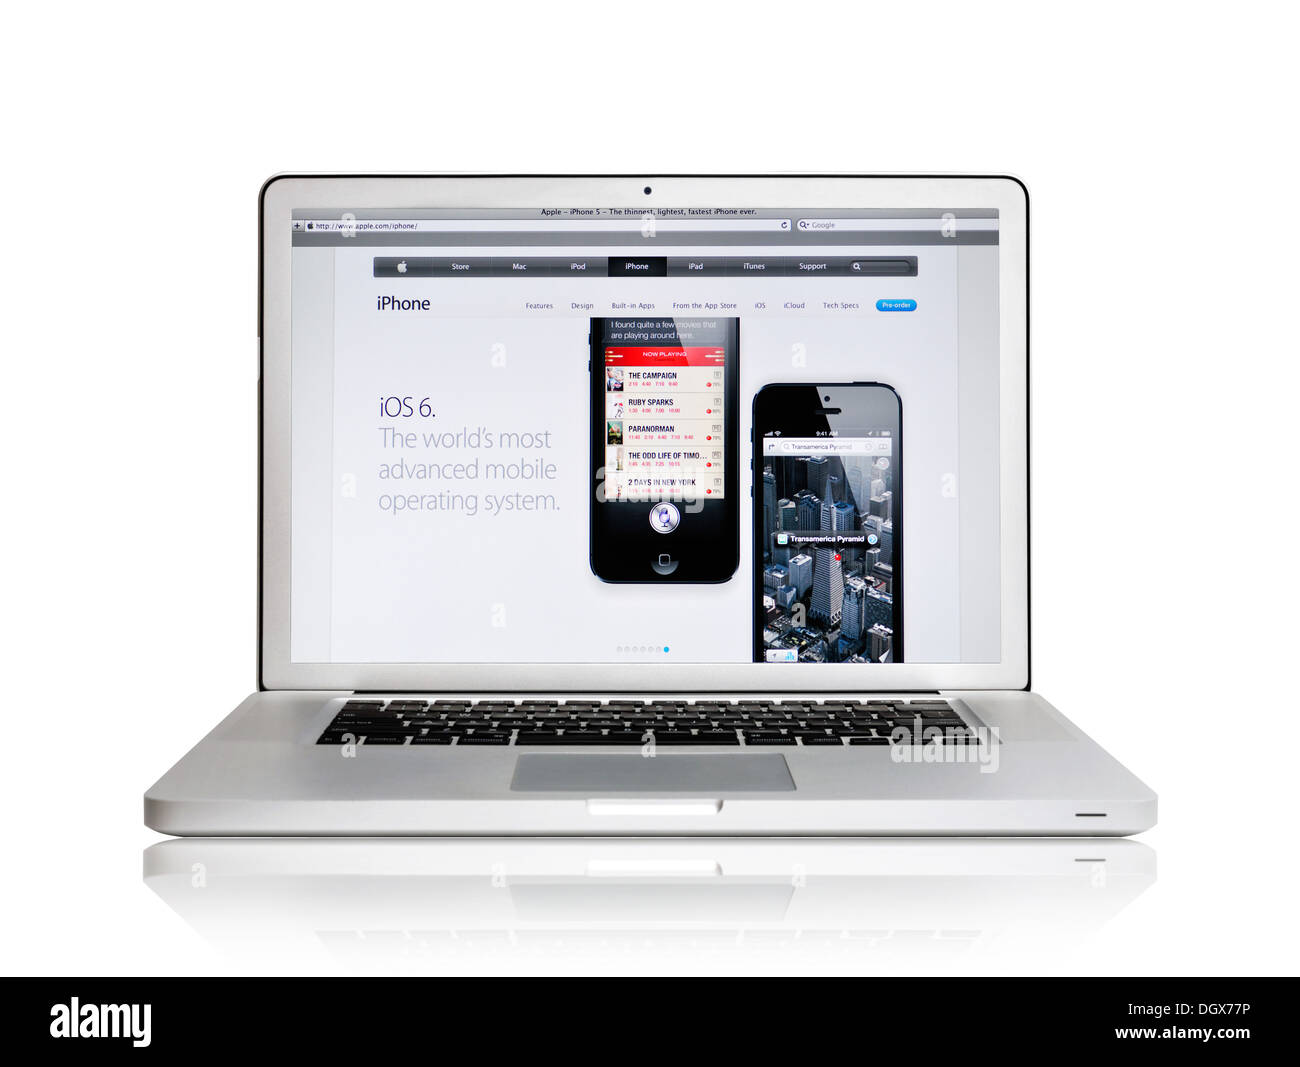 Apple store website on laptop screen showing ios6 iphone5 Stock Photo